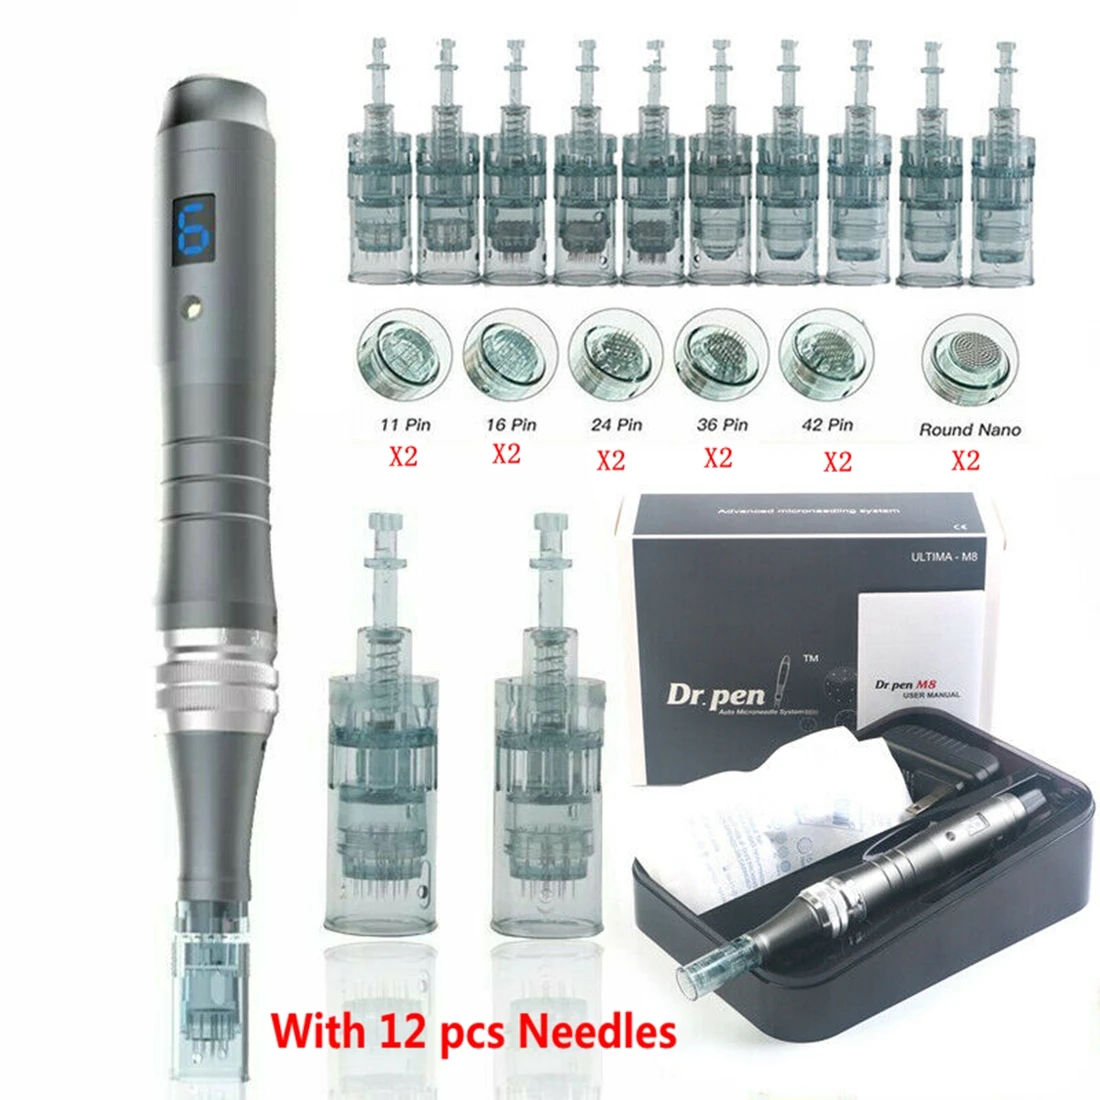 Authentic Dr pen Ultima M8 Microneedling With 12 pcs Needles Face Care Wireless Derma Pen Beuty Machine